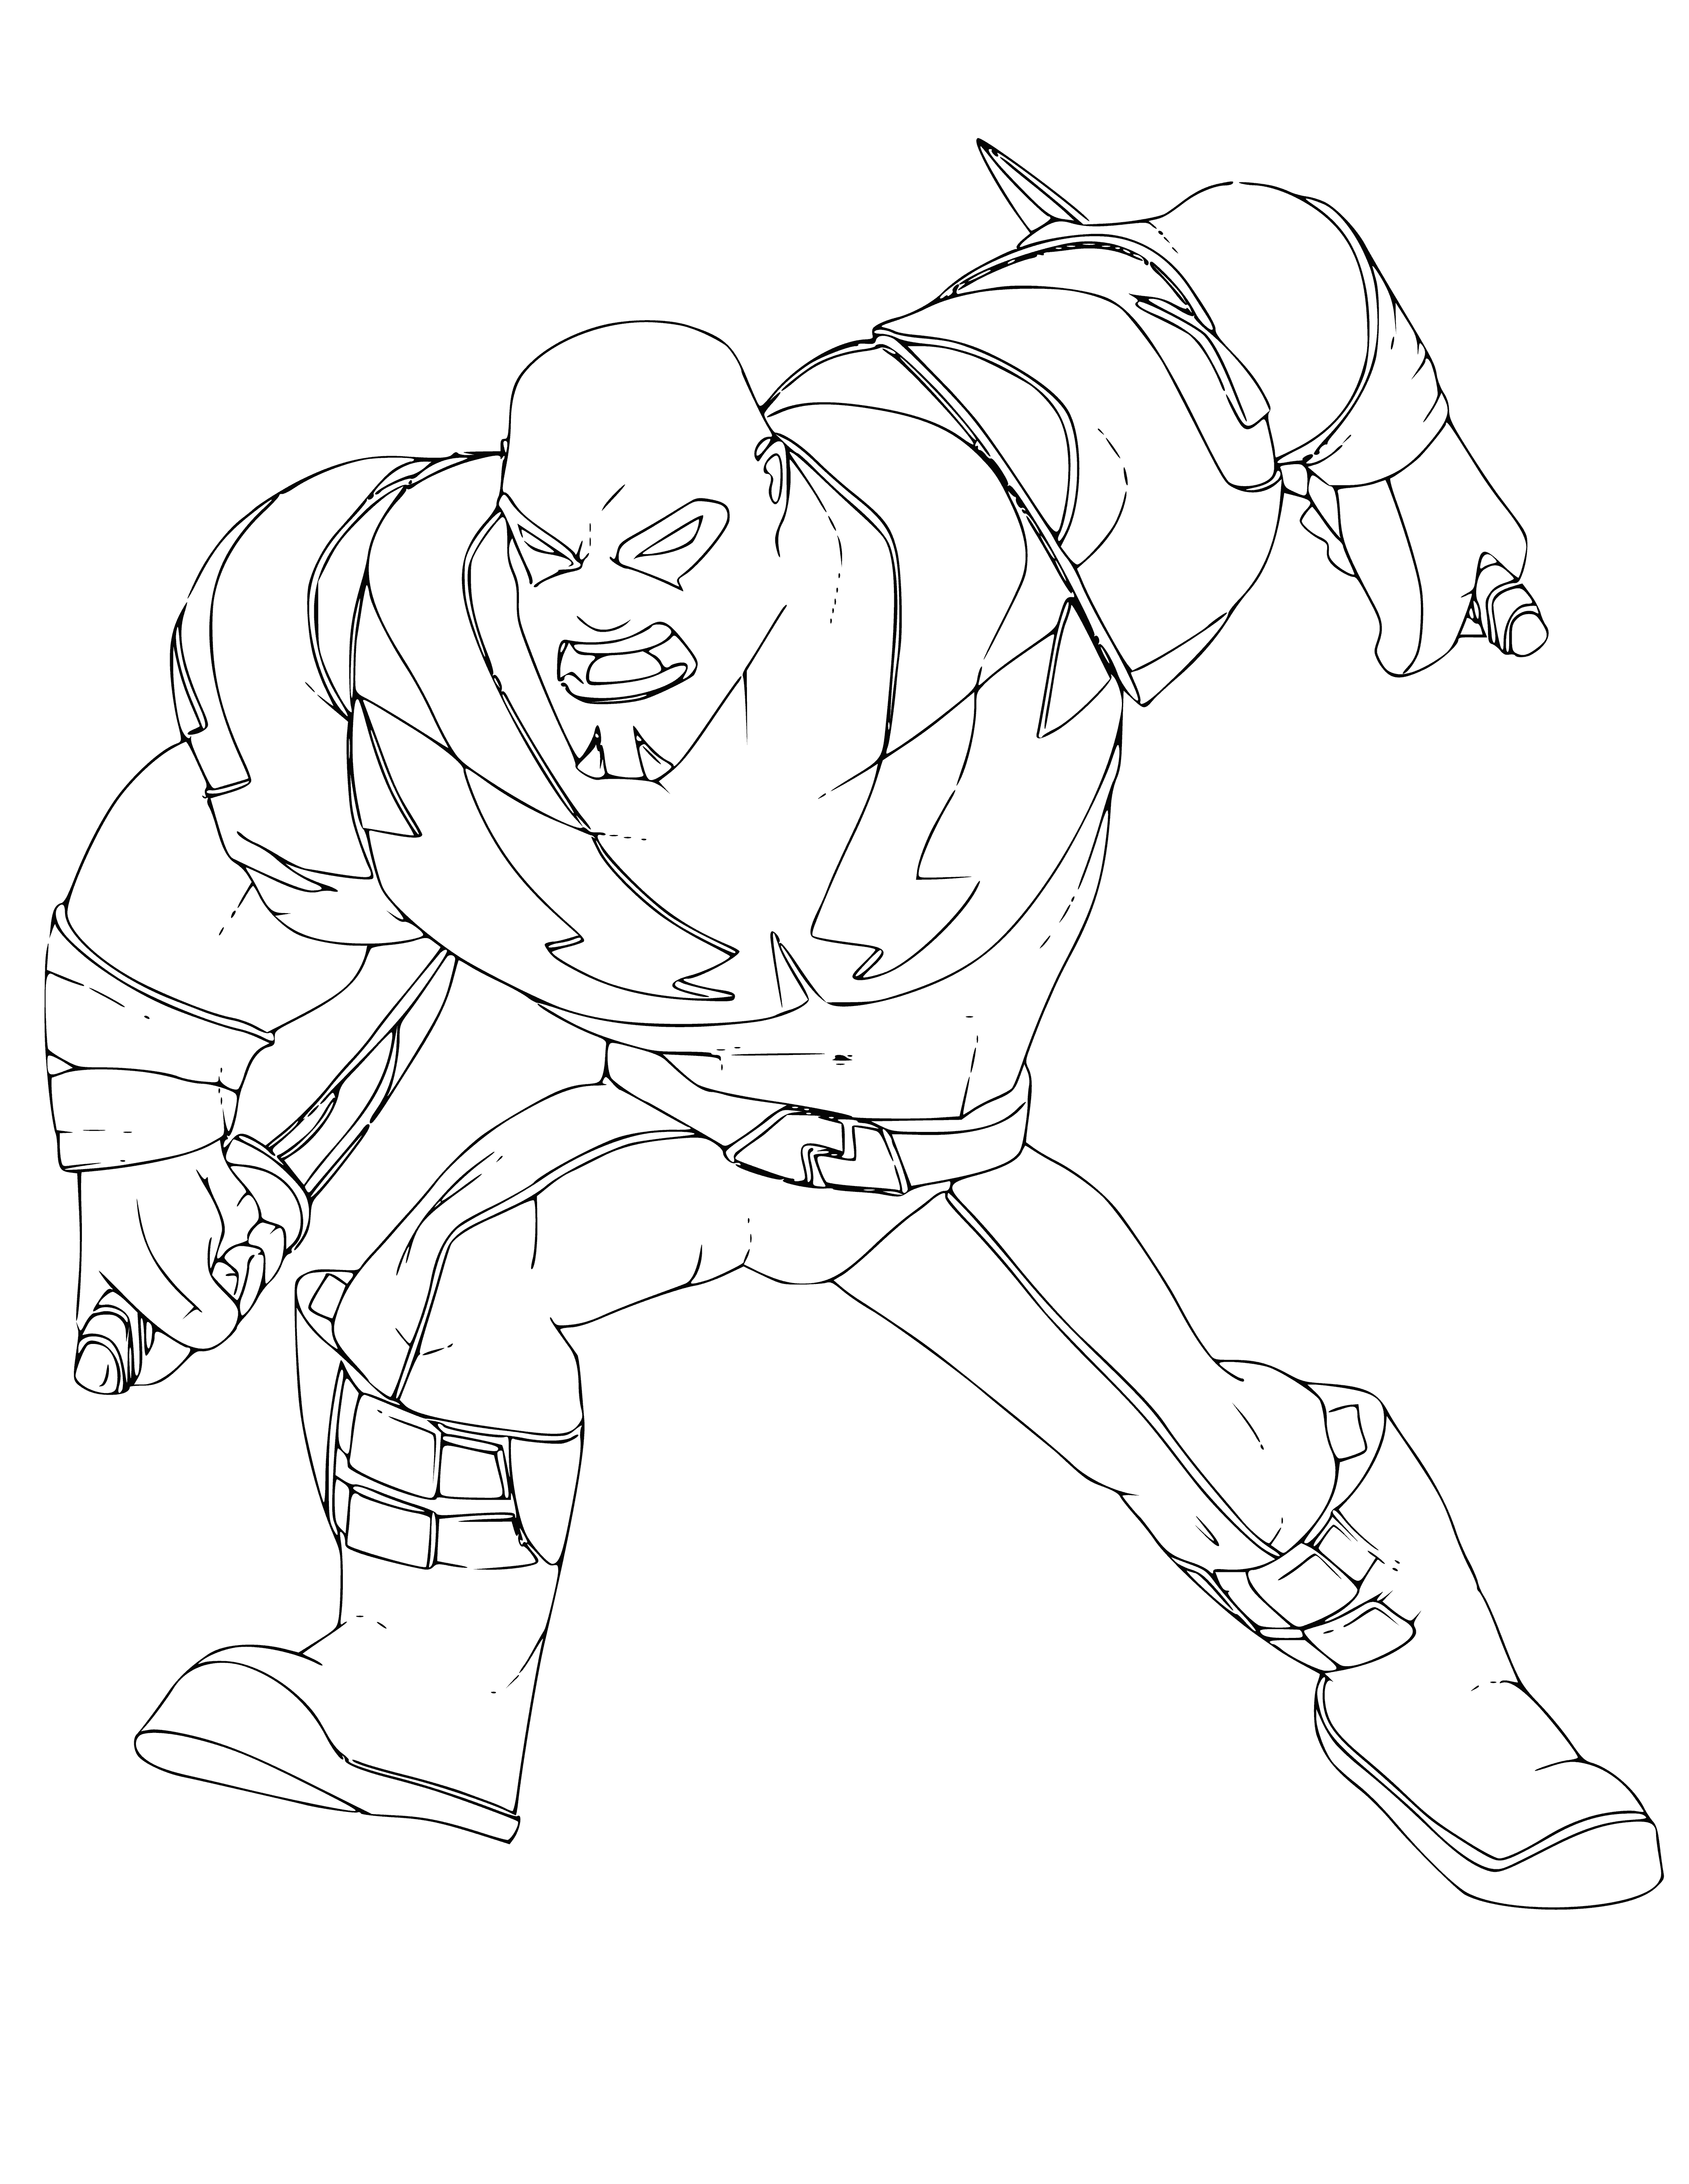 Drax coloring page